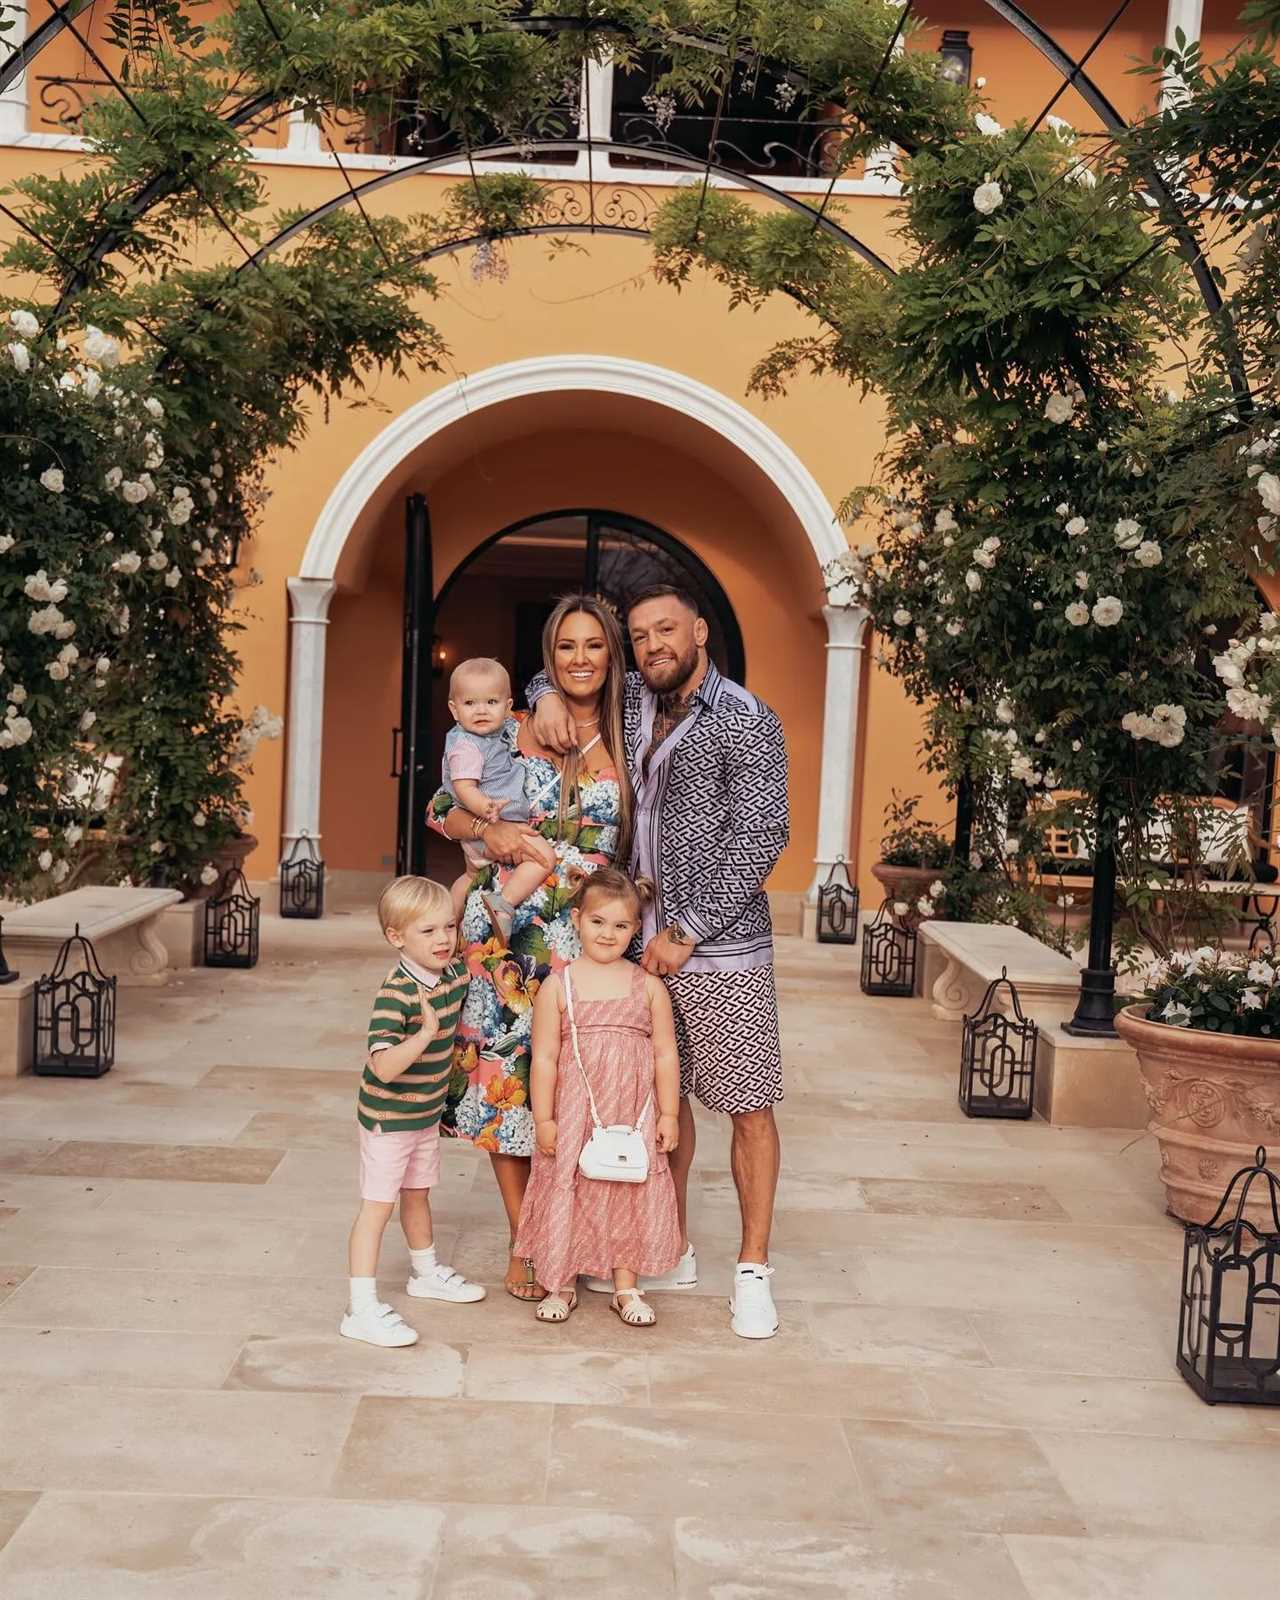 Conor McGregor and Dee Devlin host an adorable joint birthday party for their sons Conor Jr., 5 and Rian, 1 year old.